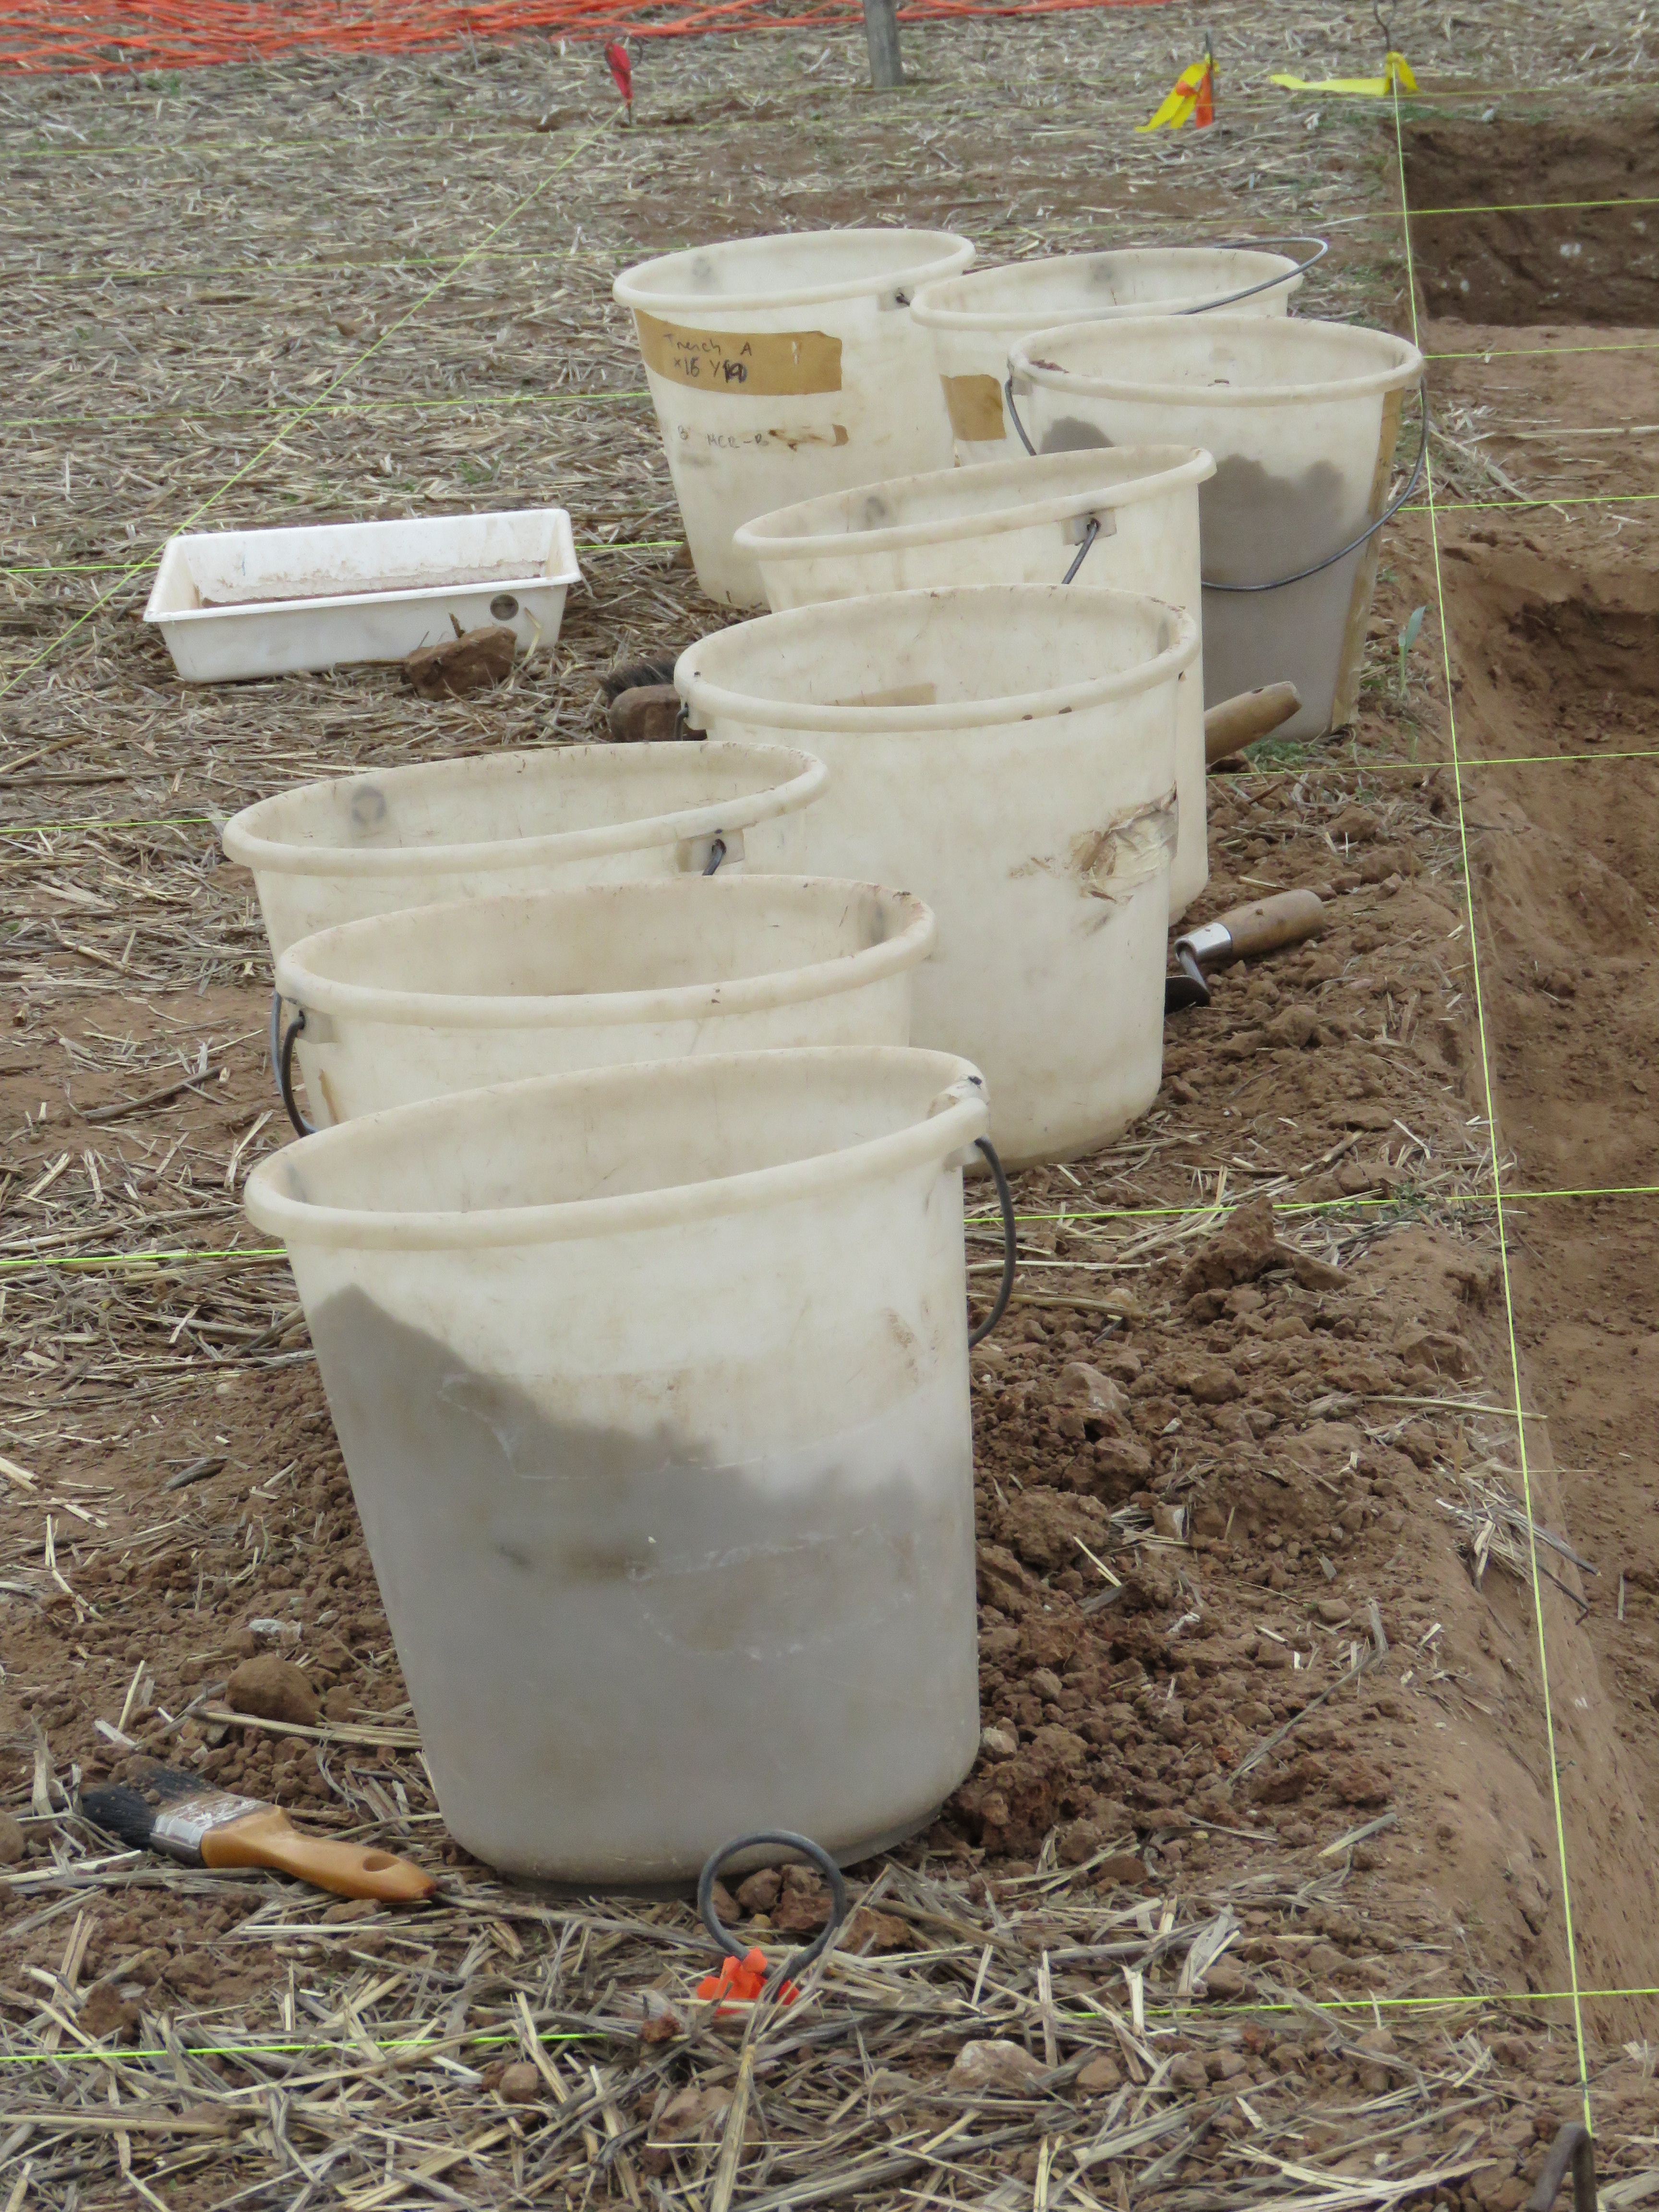 Buckets at the edge of Trench A.